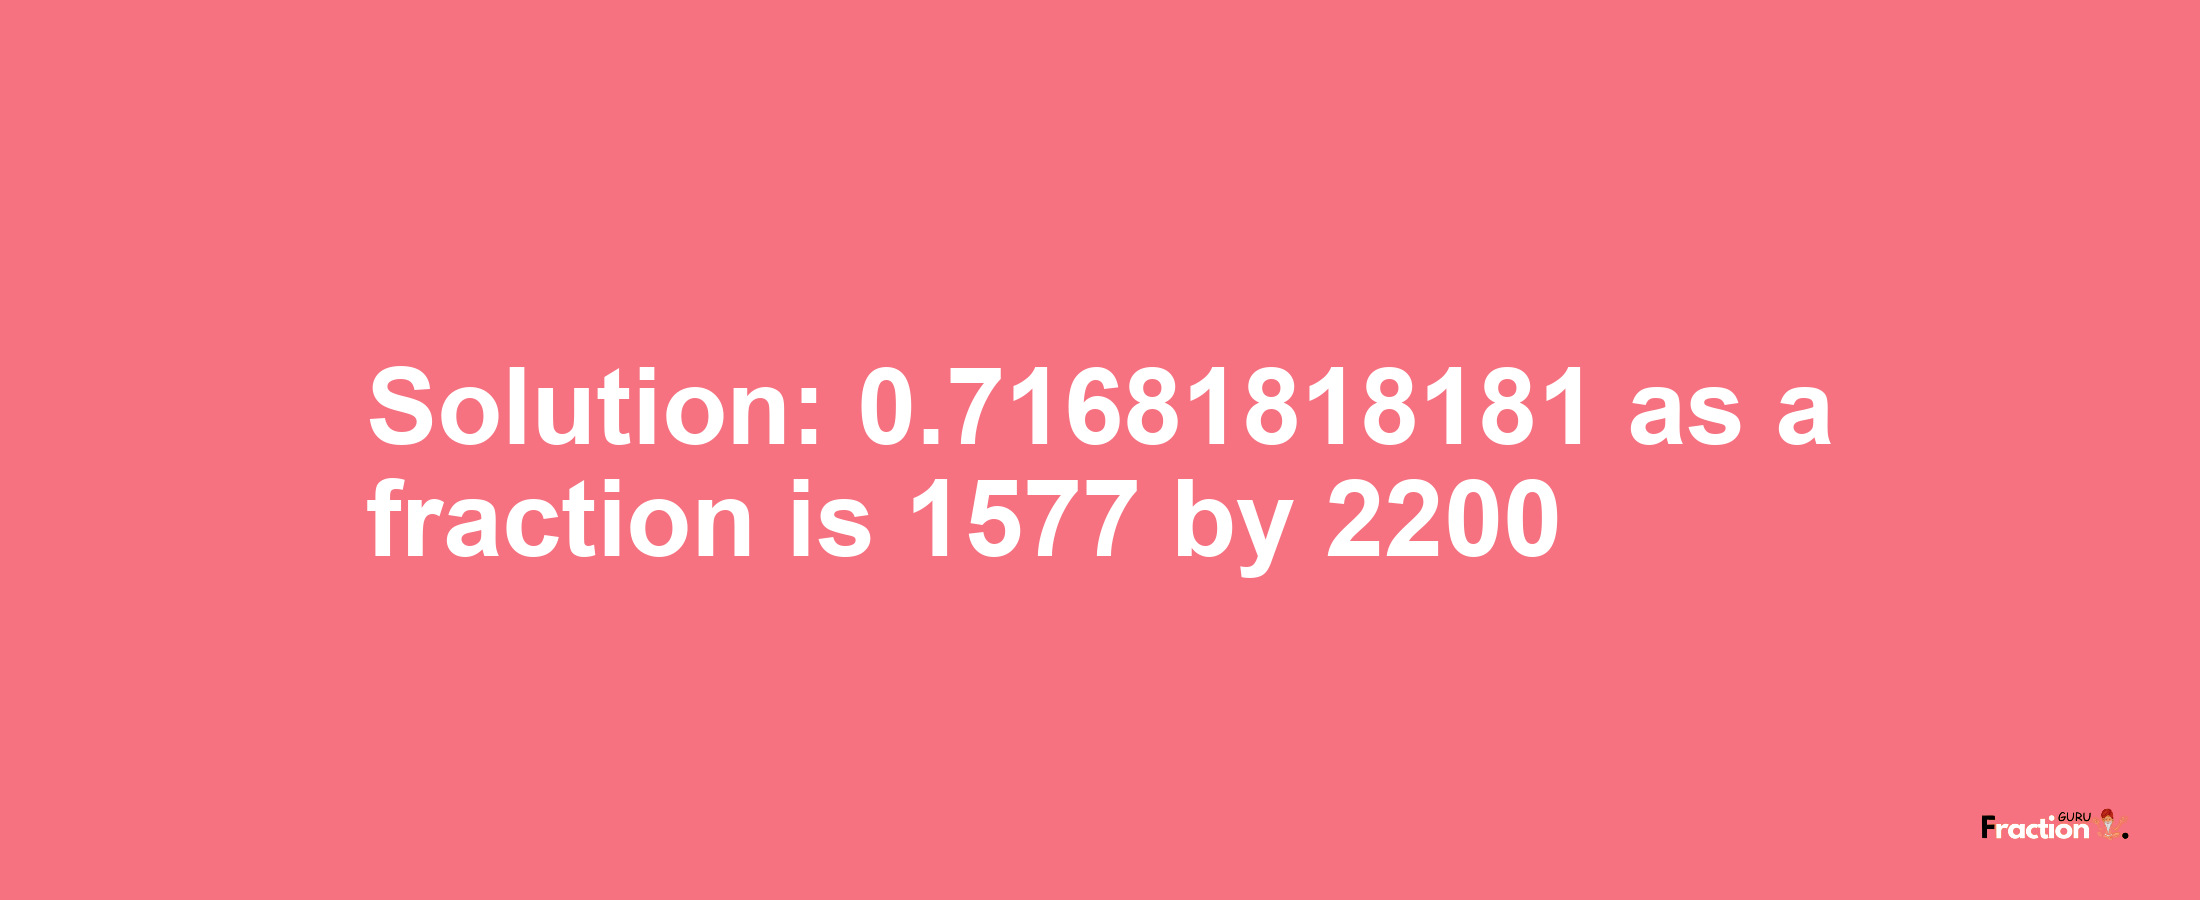 Solution:0.71681818181 as a fraction is 1577/2200